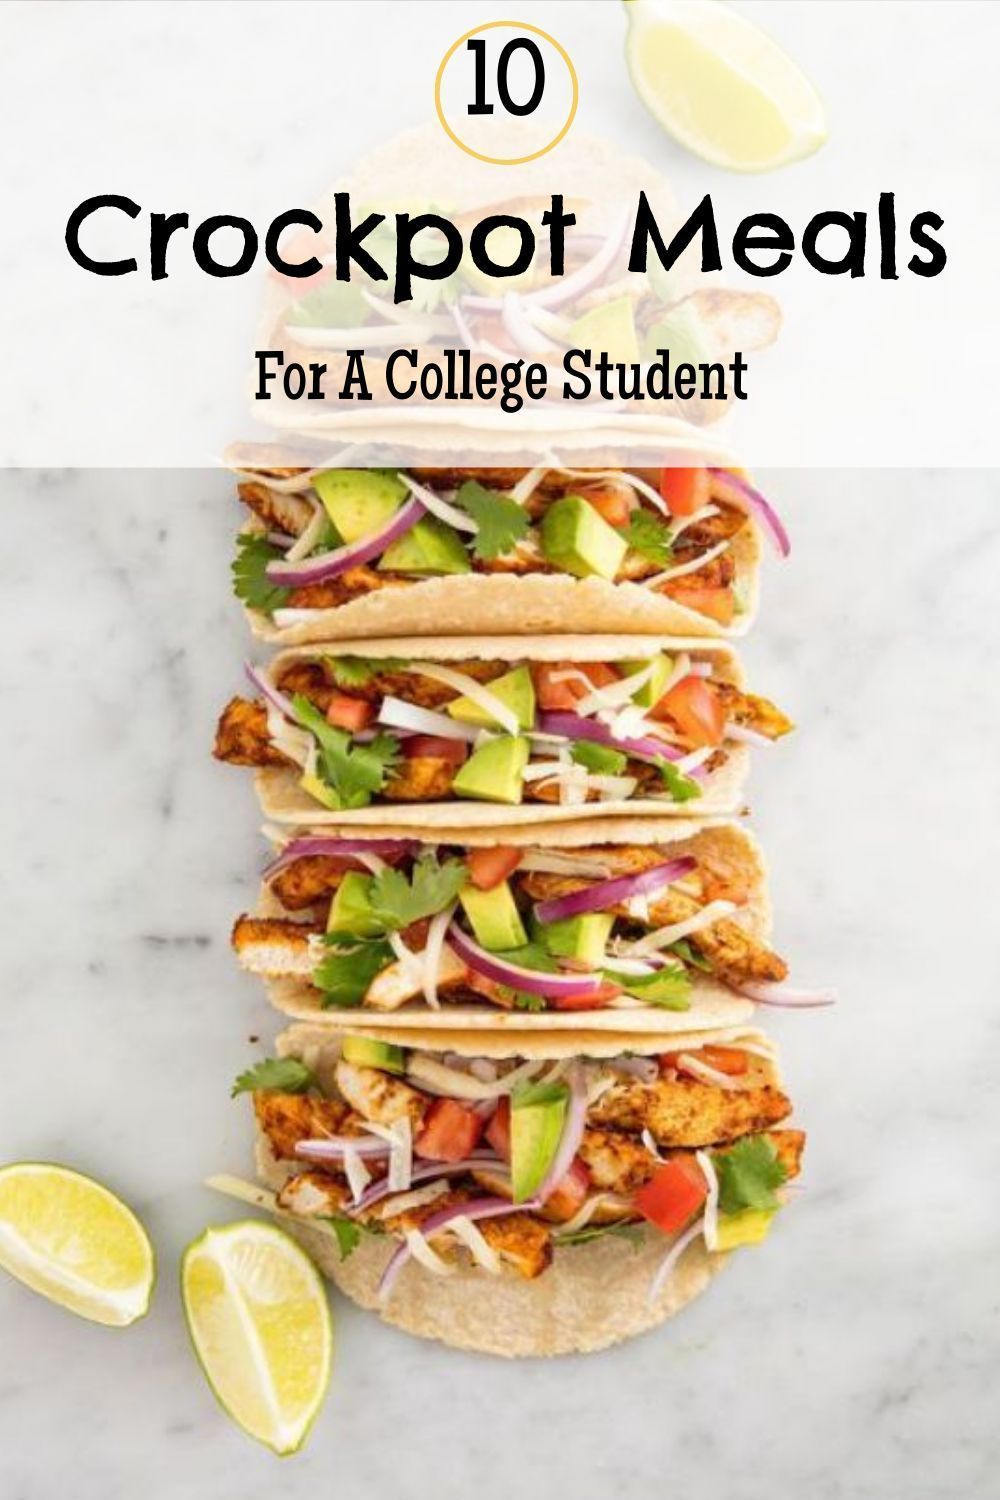 10 Crockpot Meals For A College Student -   14 healthy recipes For College Students snacks ideas